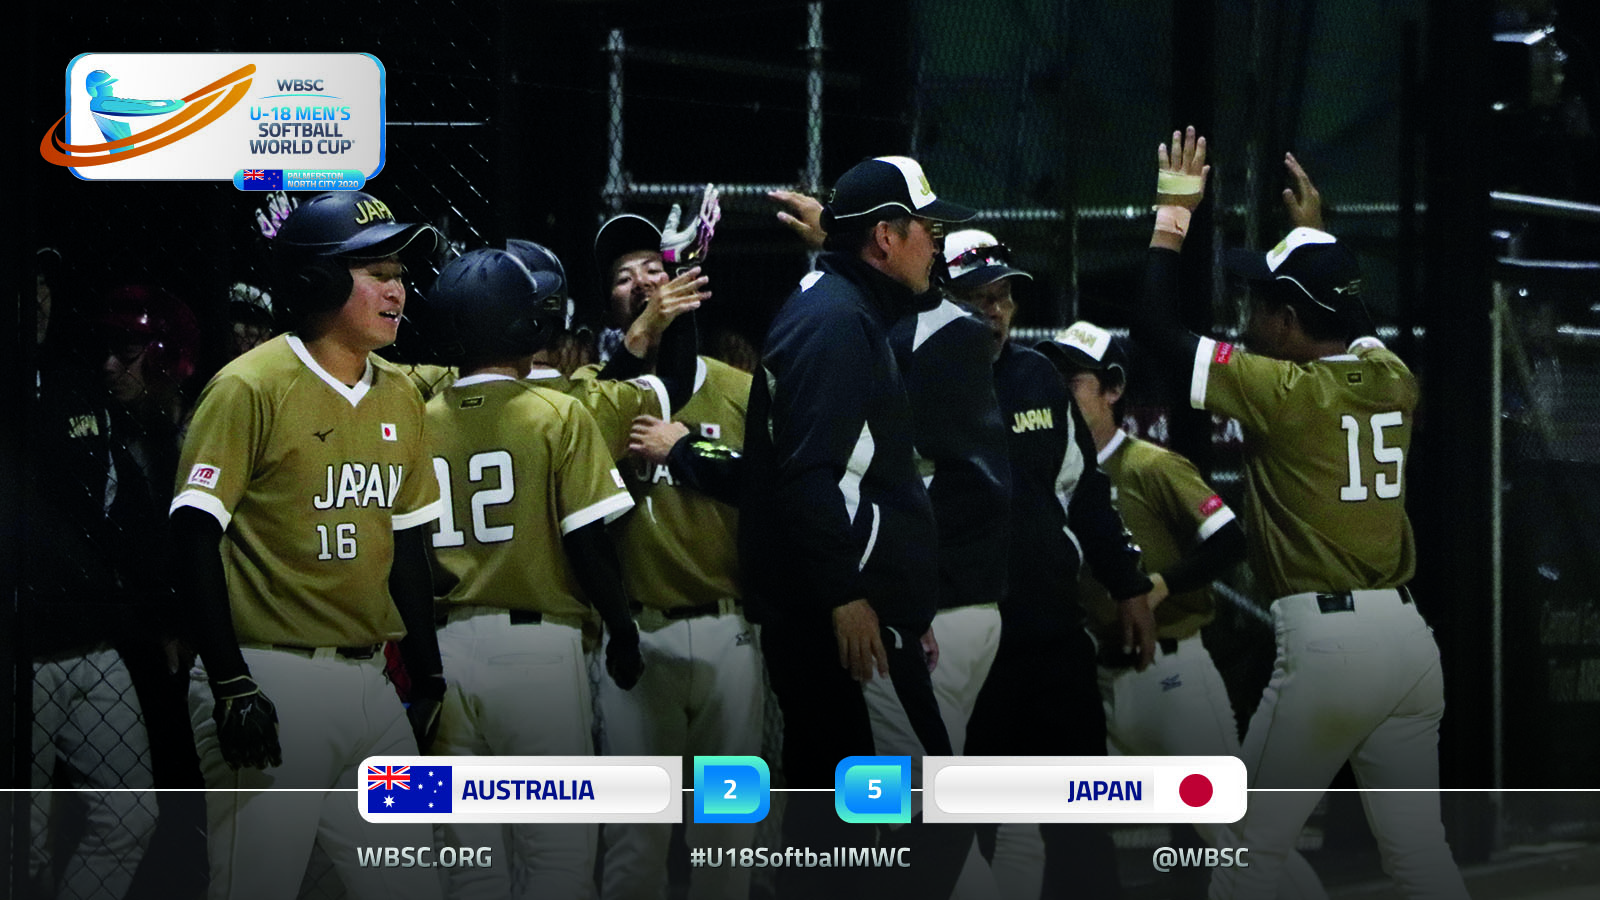 Japan overcame Australia to top the standings ©WBSC